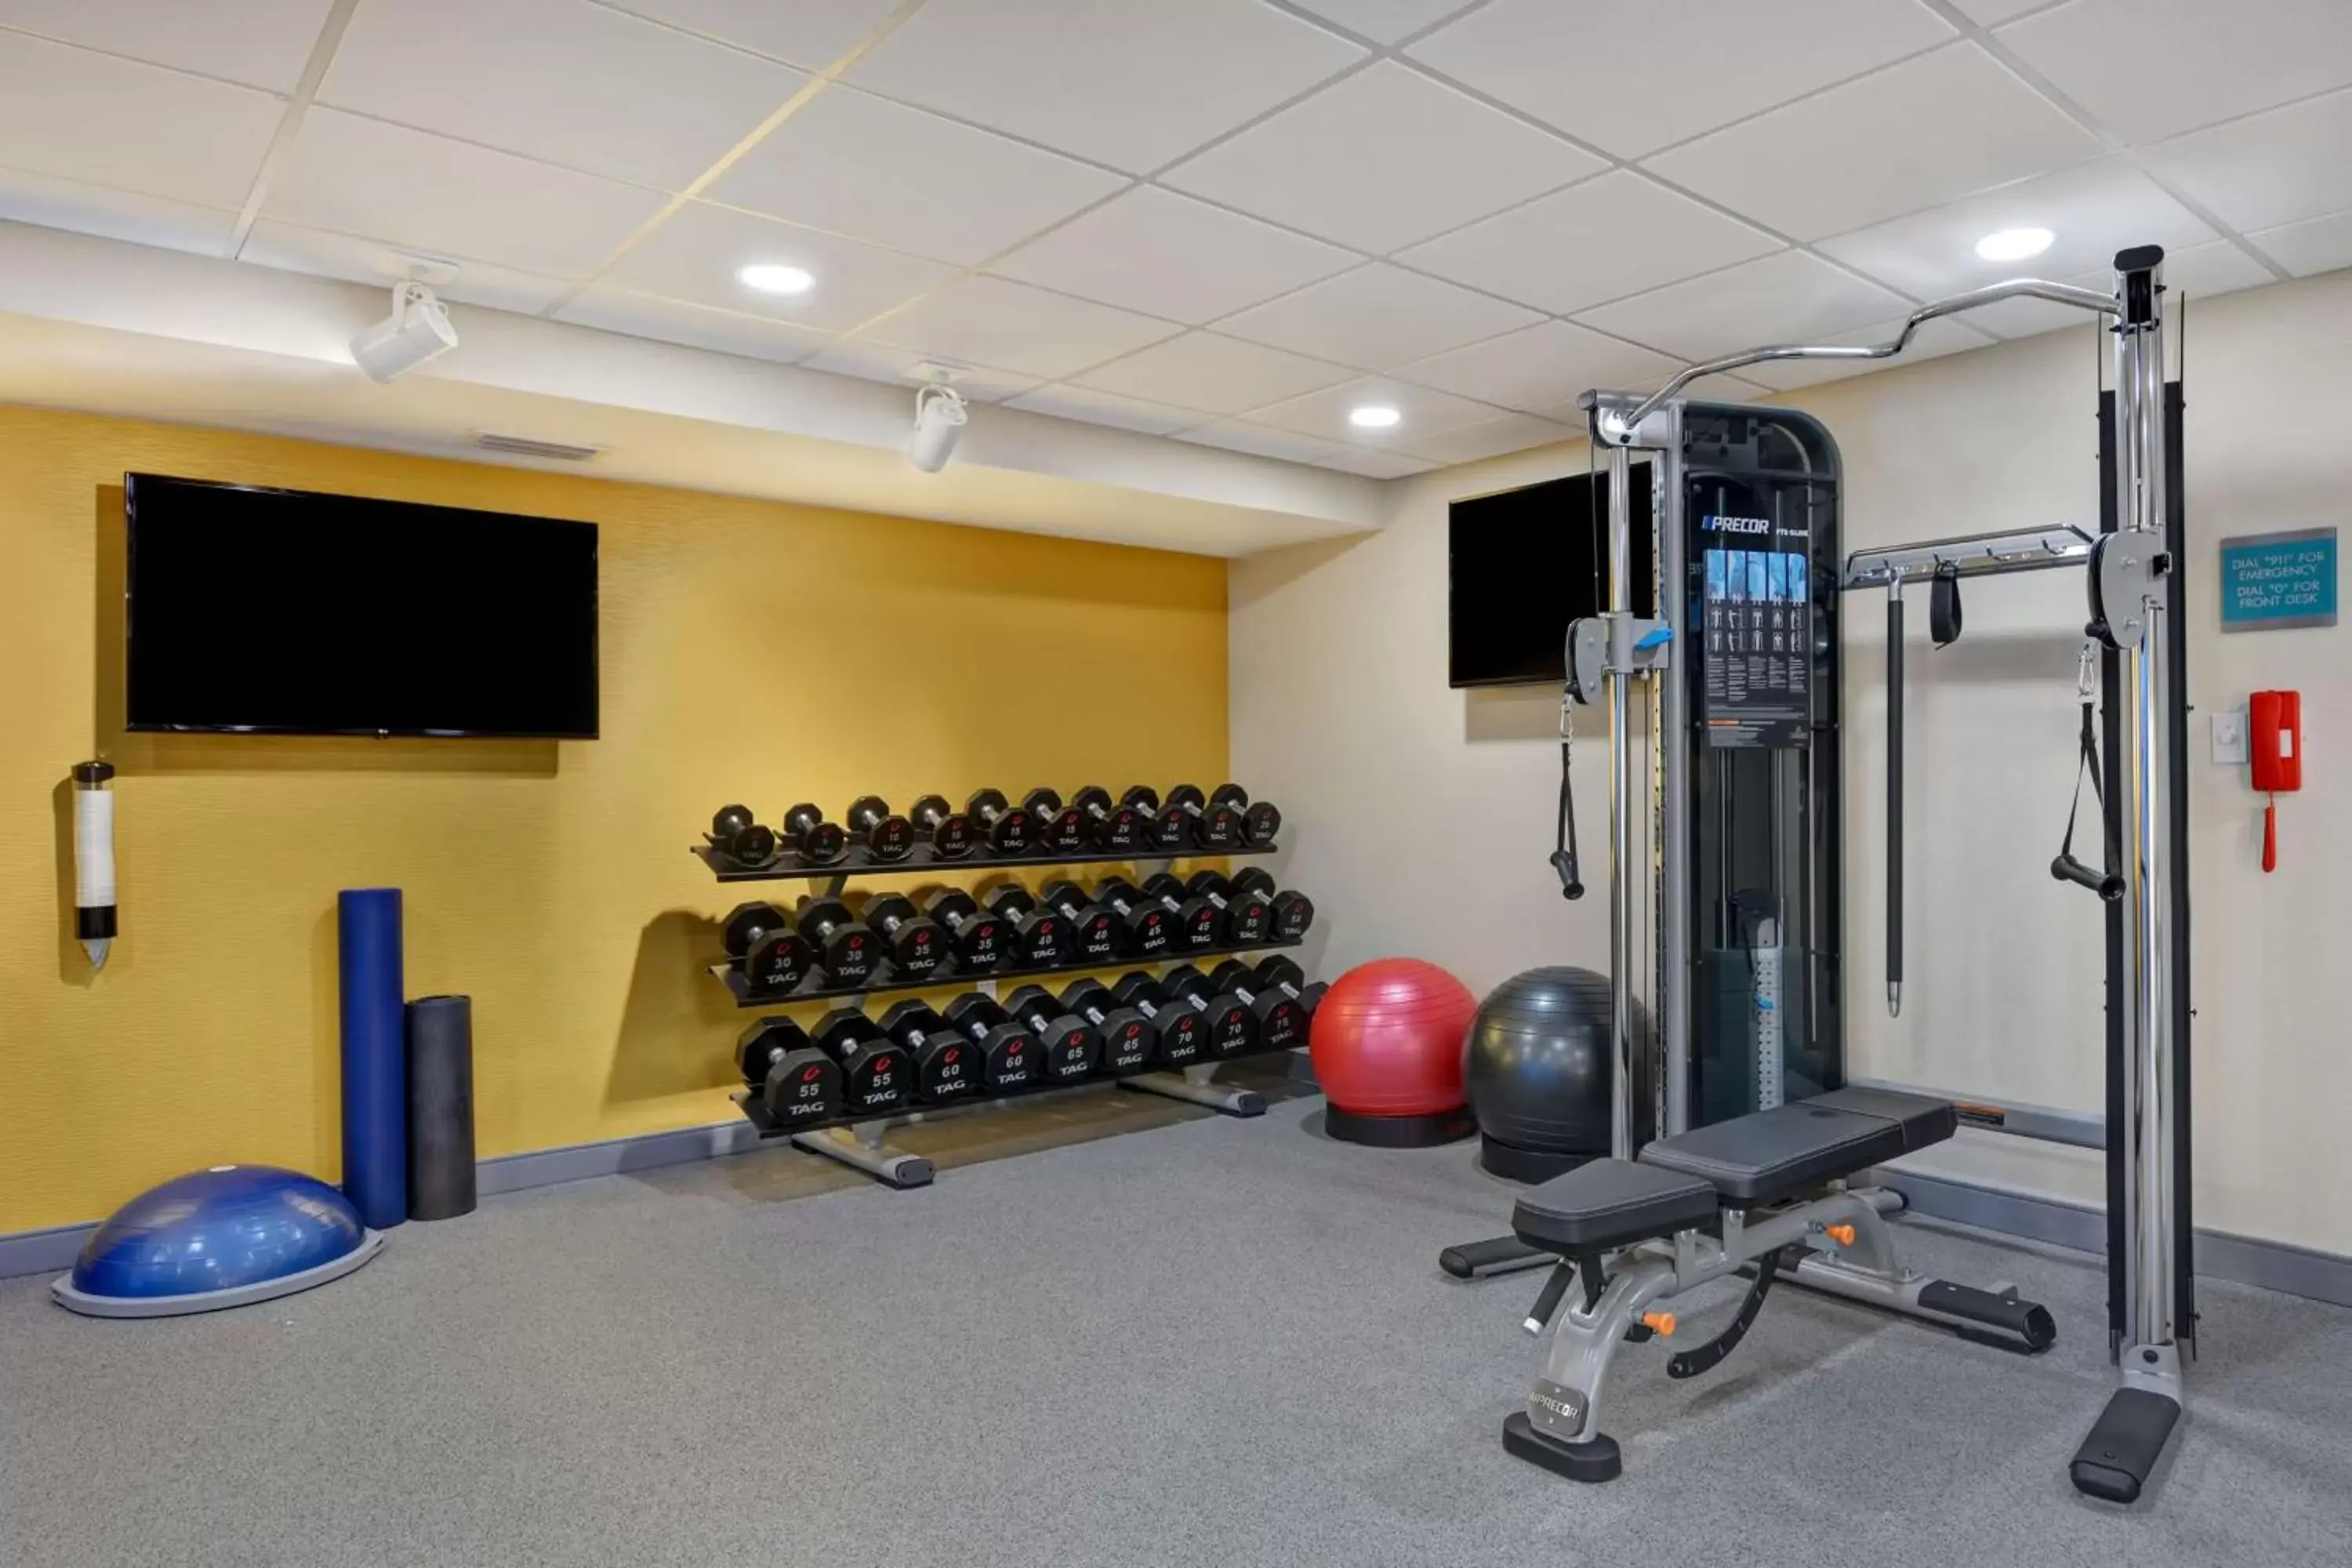 Fitness centre/facilities, Fitness Center/Facilities in Home2 Suites Ormond Beach Oceanfront, FL